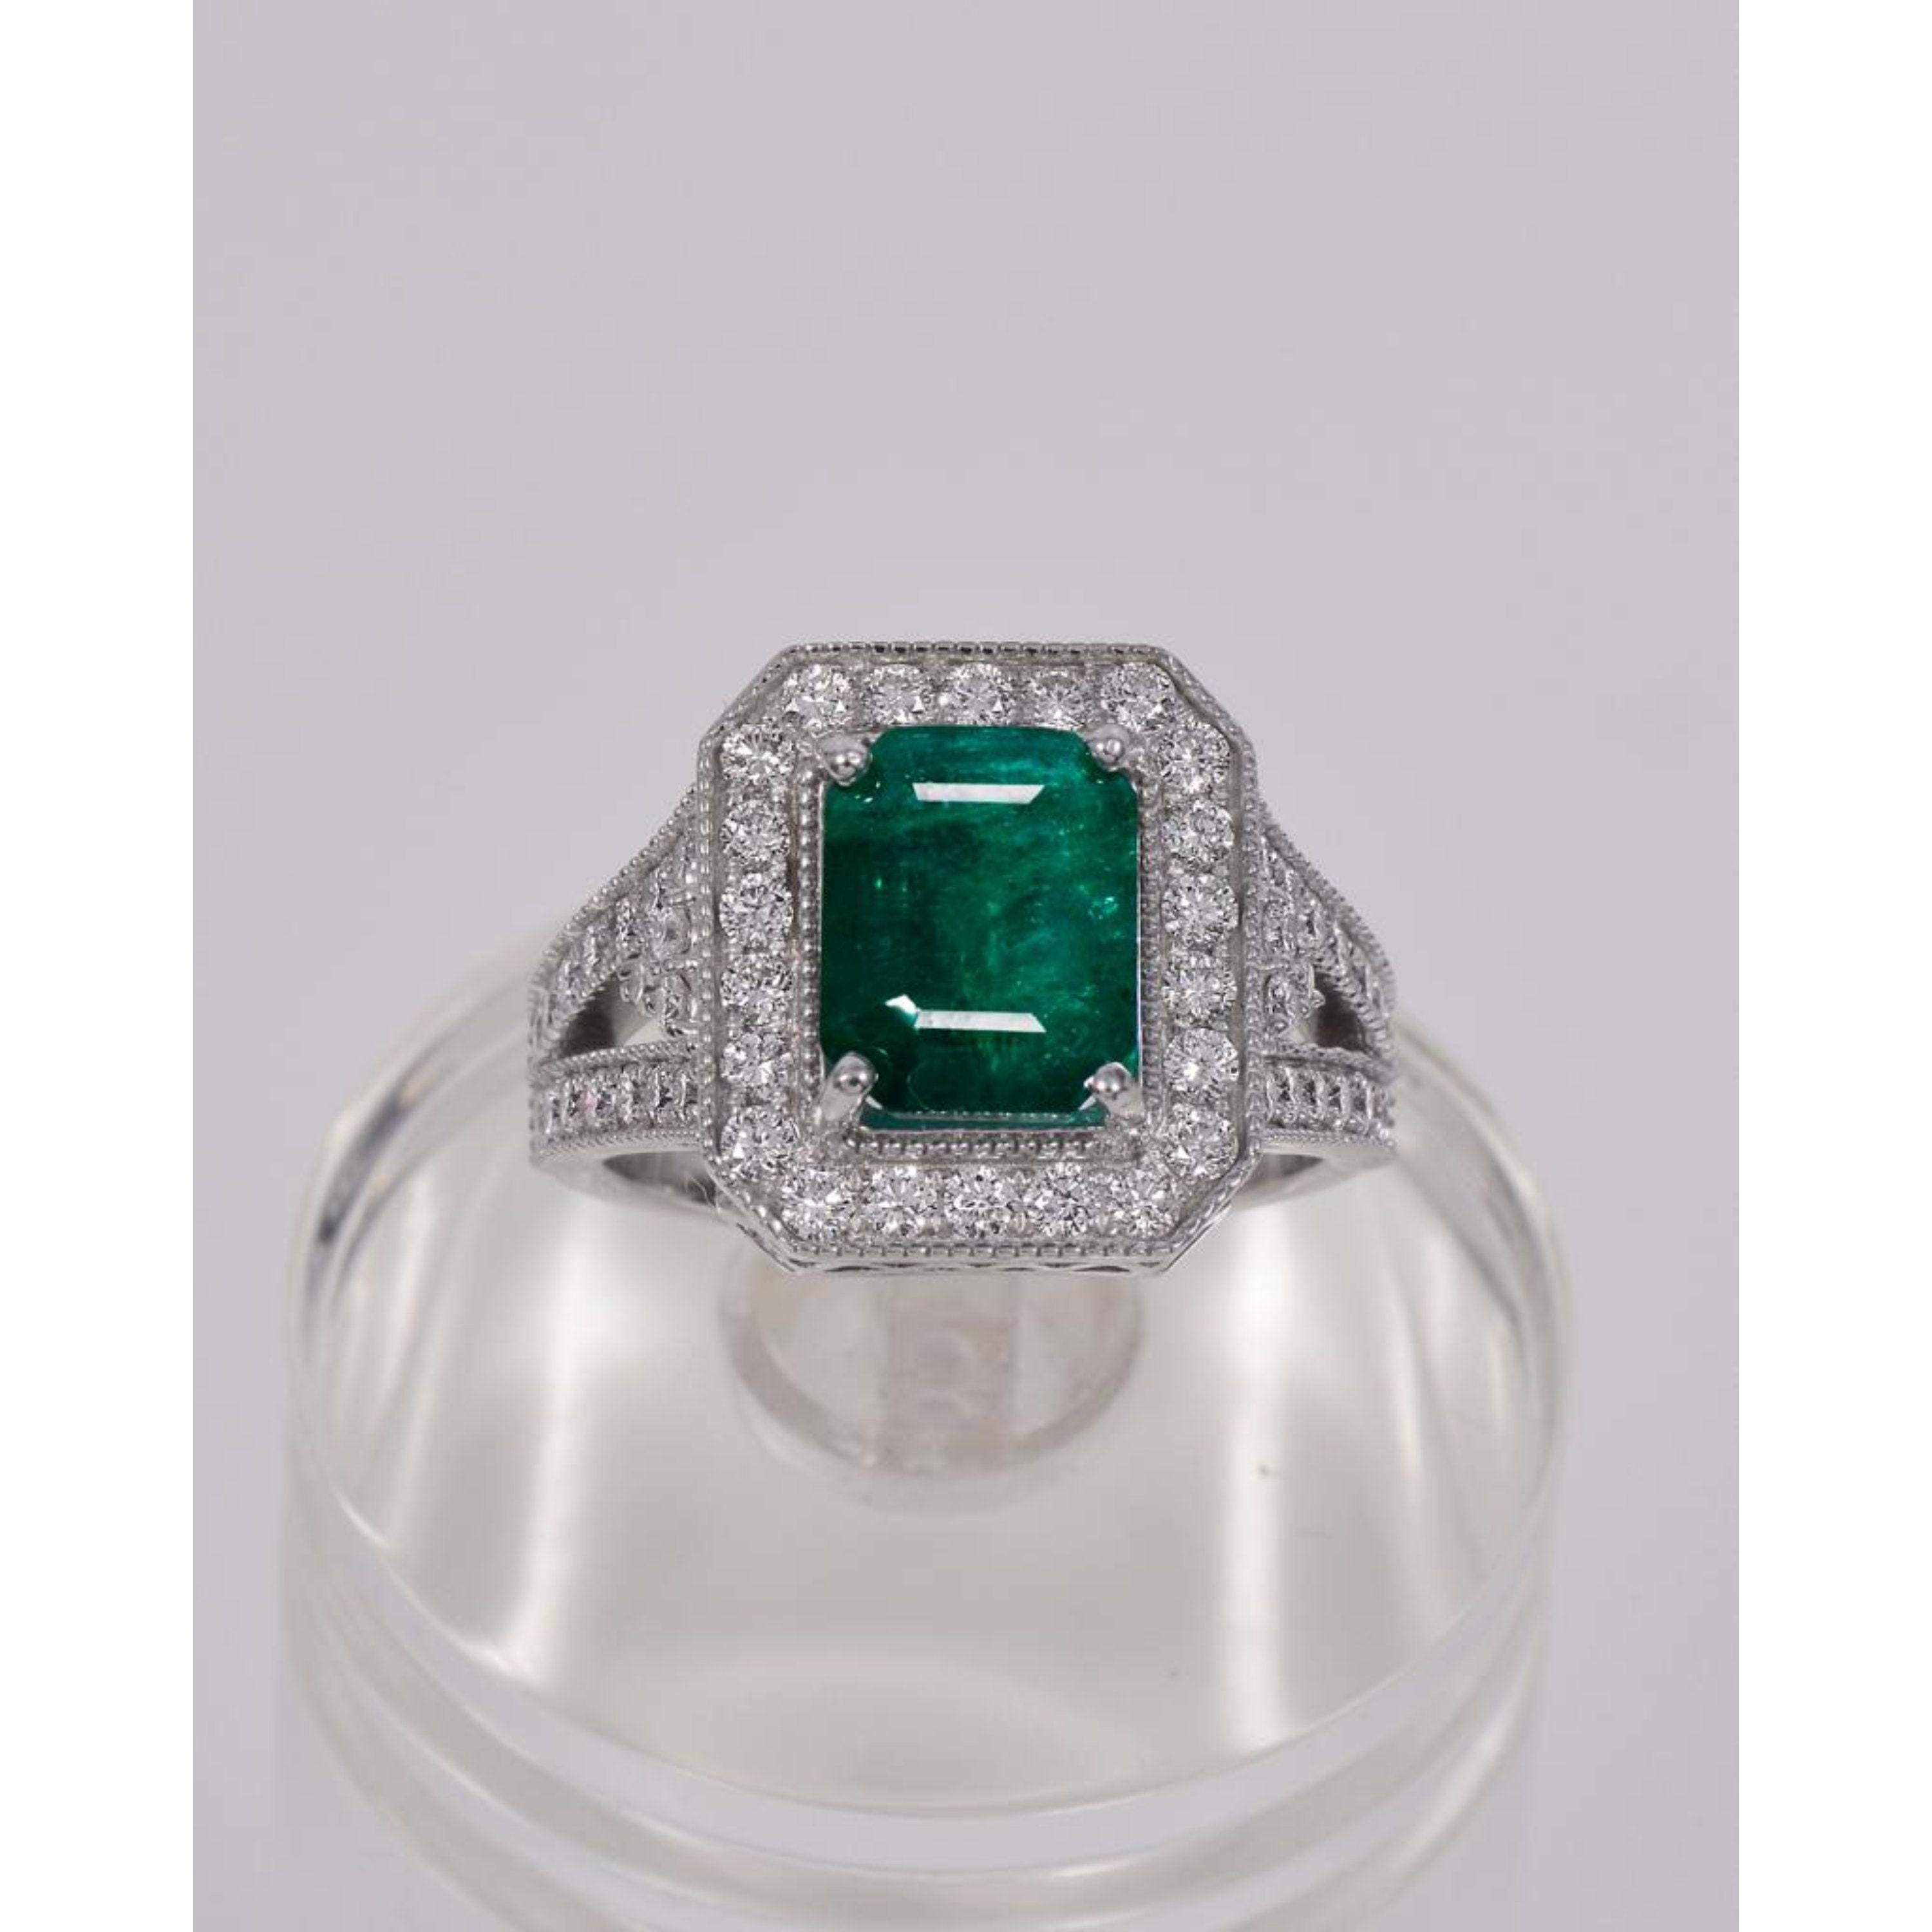 For Sale:  Art Deco 3.01 Carat Emerald and Diamond White Gold Engagement Ring Wedding Ring 7